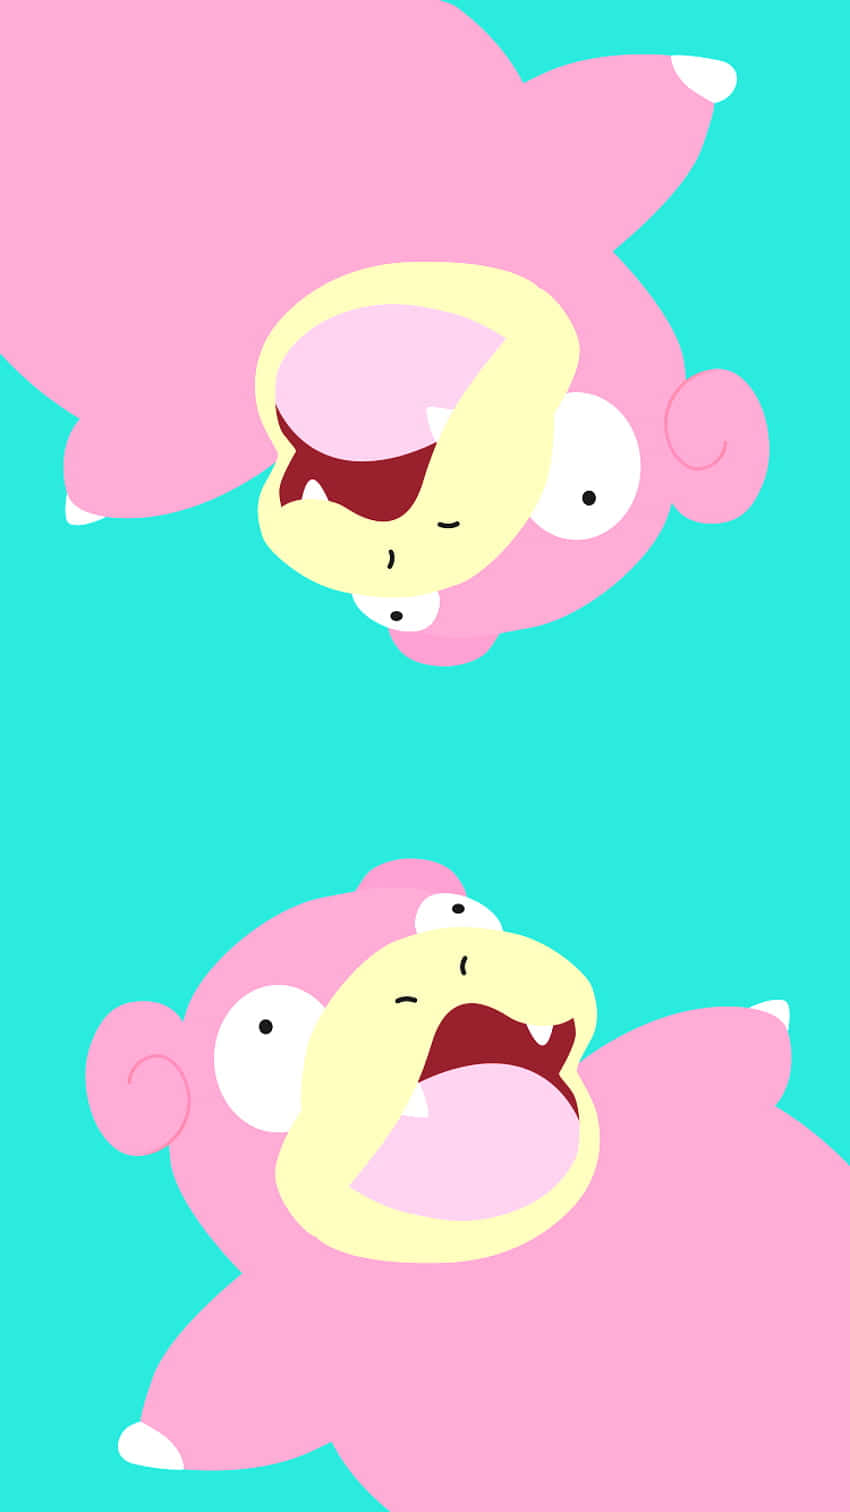 Silly Slowbro Wallpaper